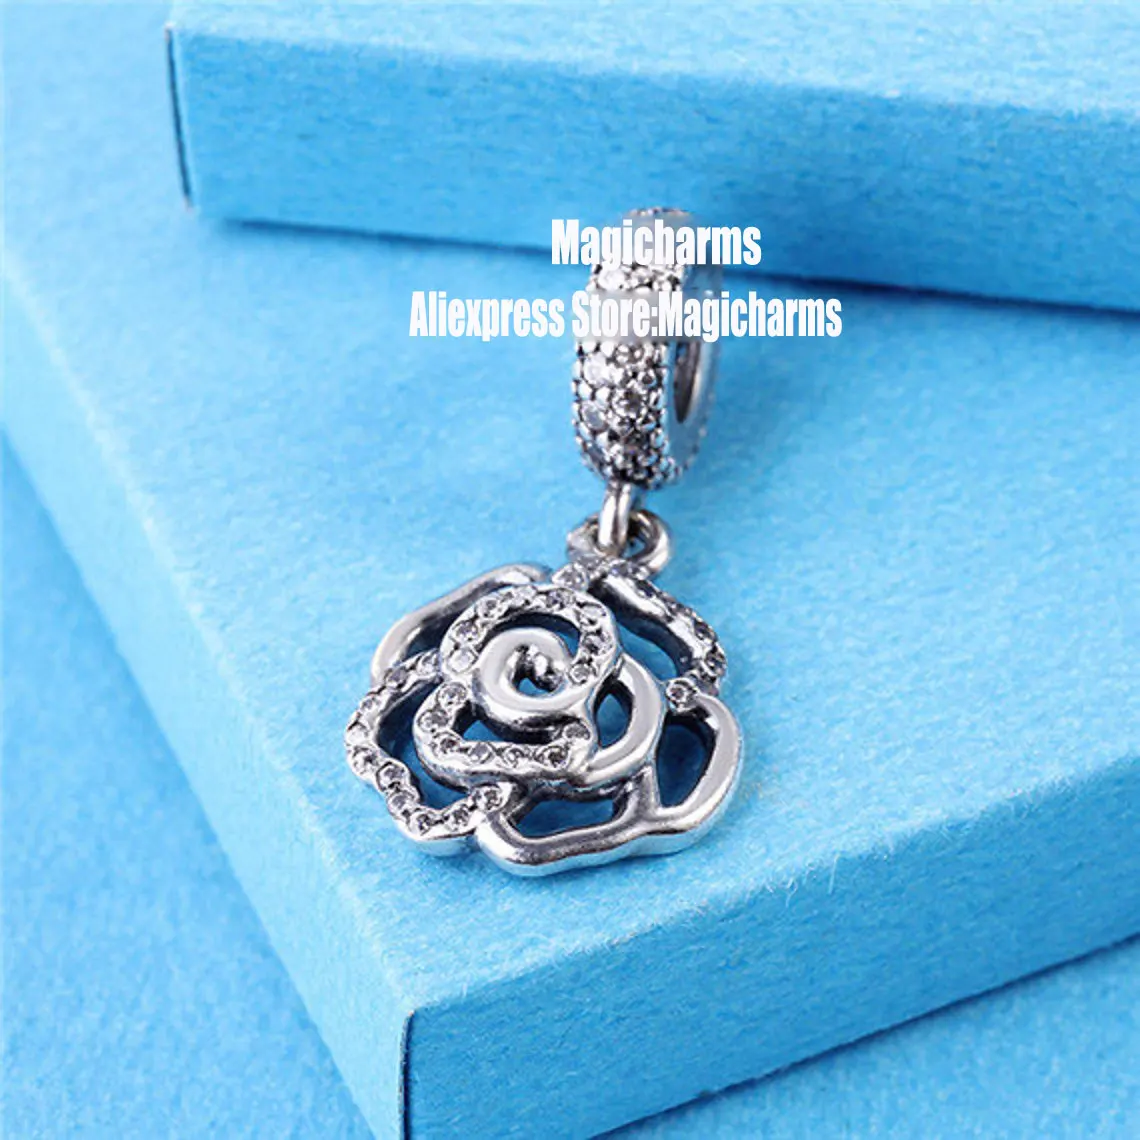 

925 Sterling Silver Shimmering Rose with Clear CZ Dangle Pendant Charm Bead Fits All European Pandora Bracelets Necklaces